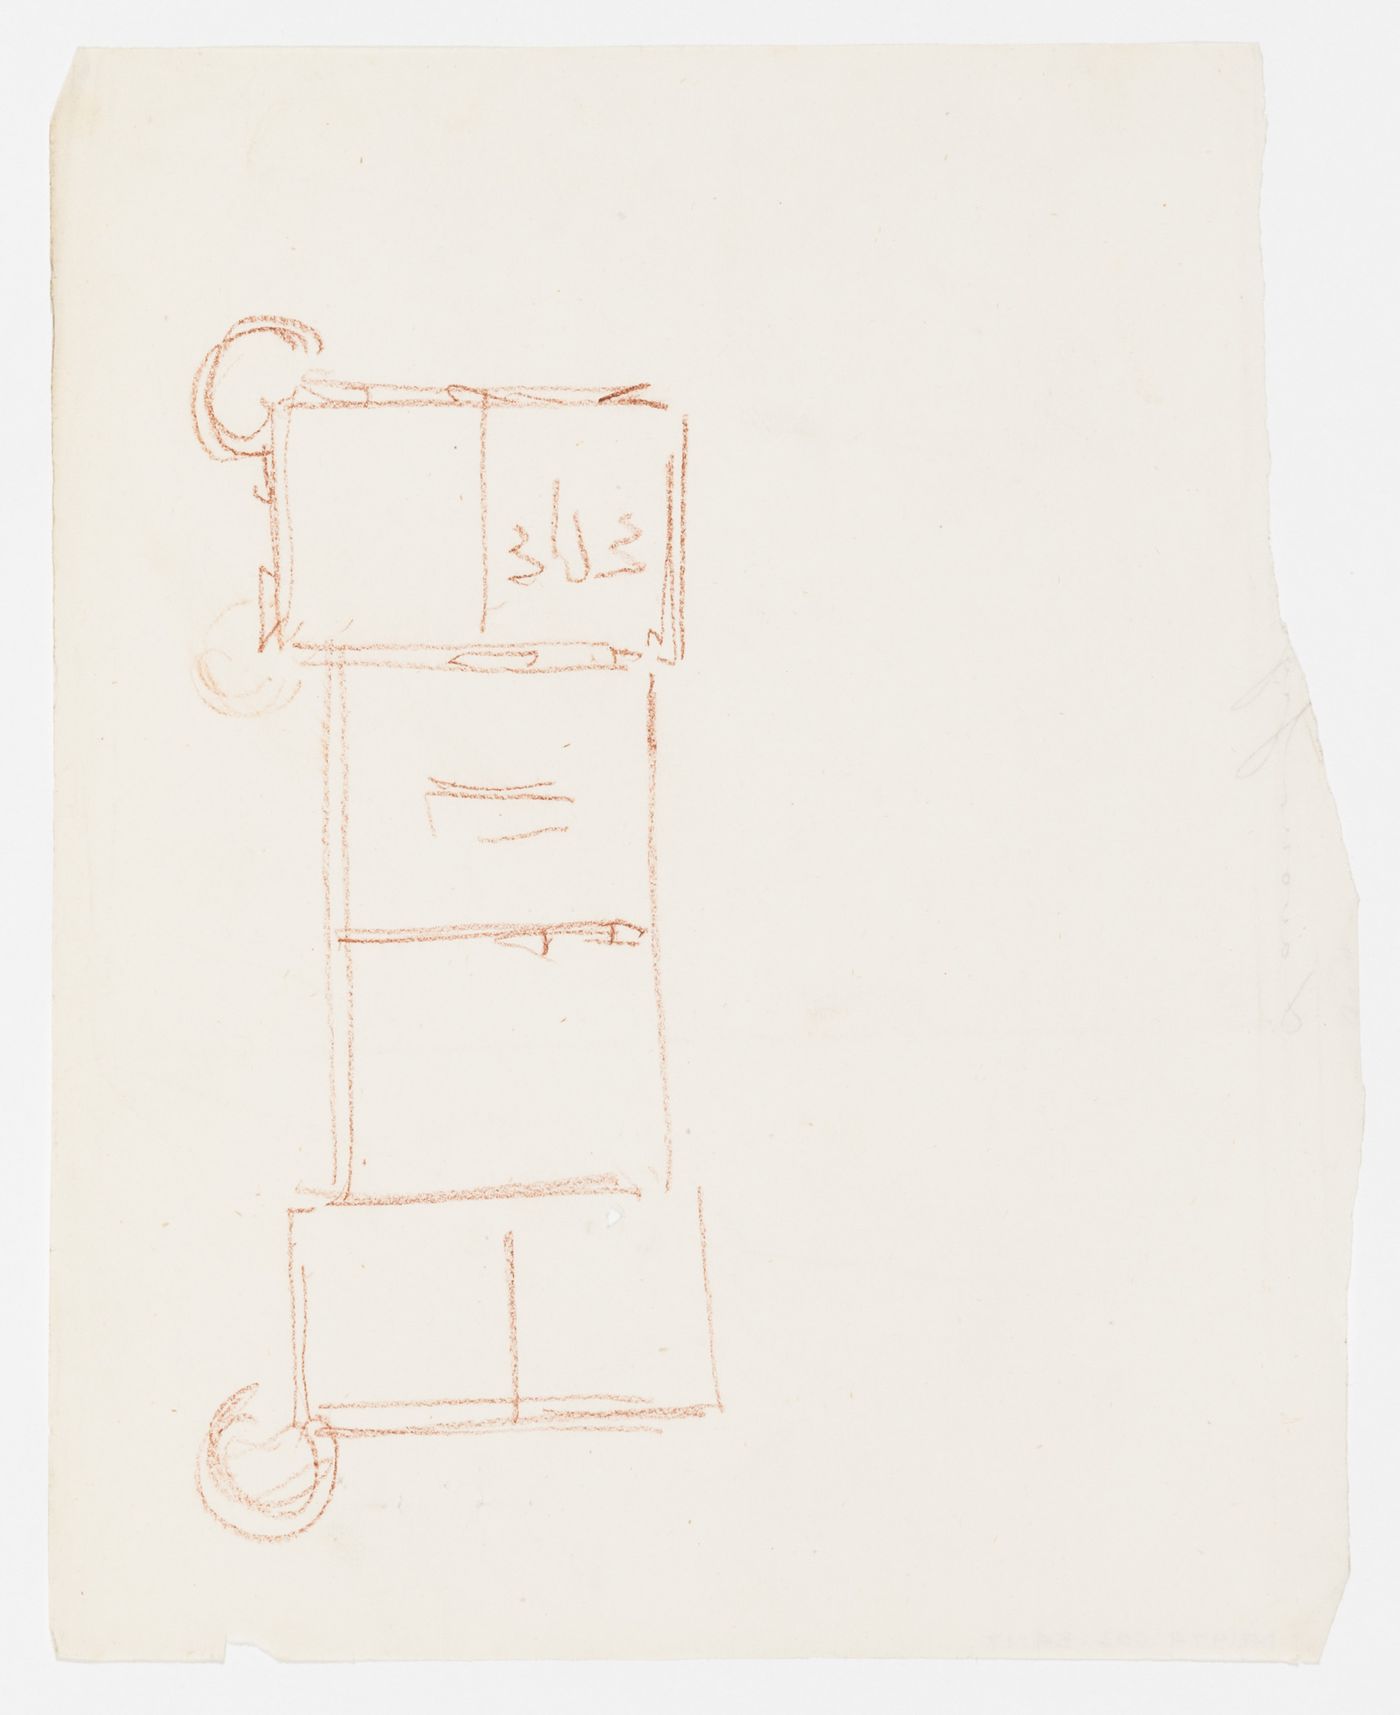 Project for a country house for comte Treilhard: Unidentified sketch plan